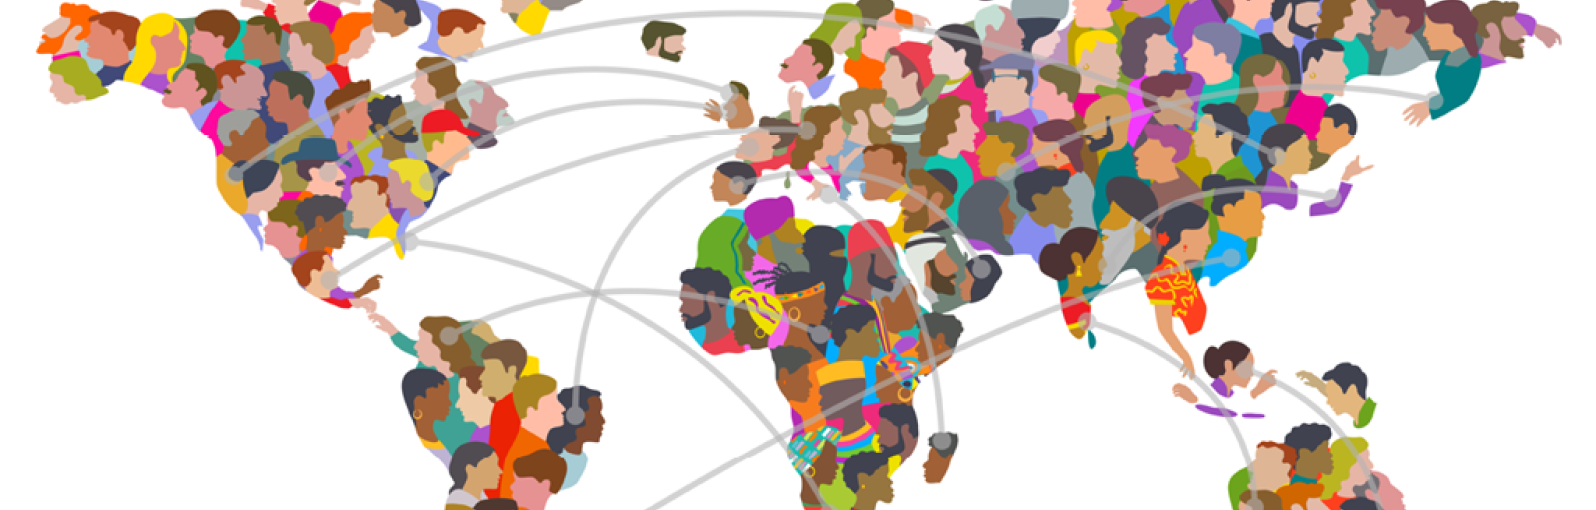 Illustration of a world map made up of people's faces with lines connecting countries